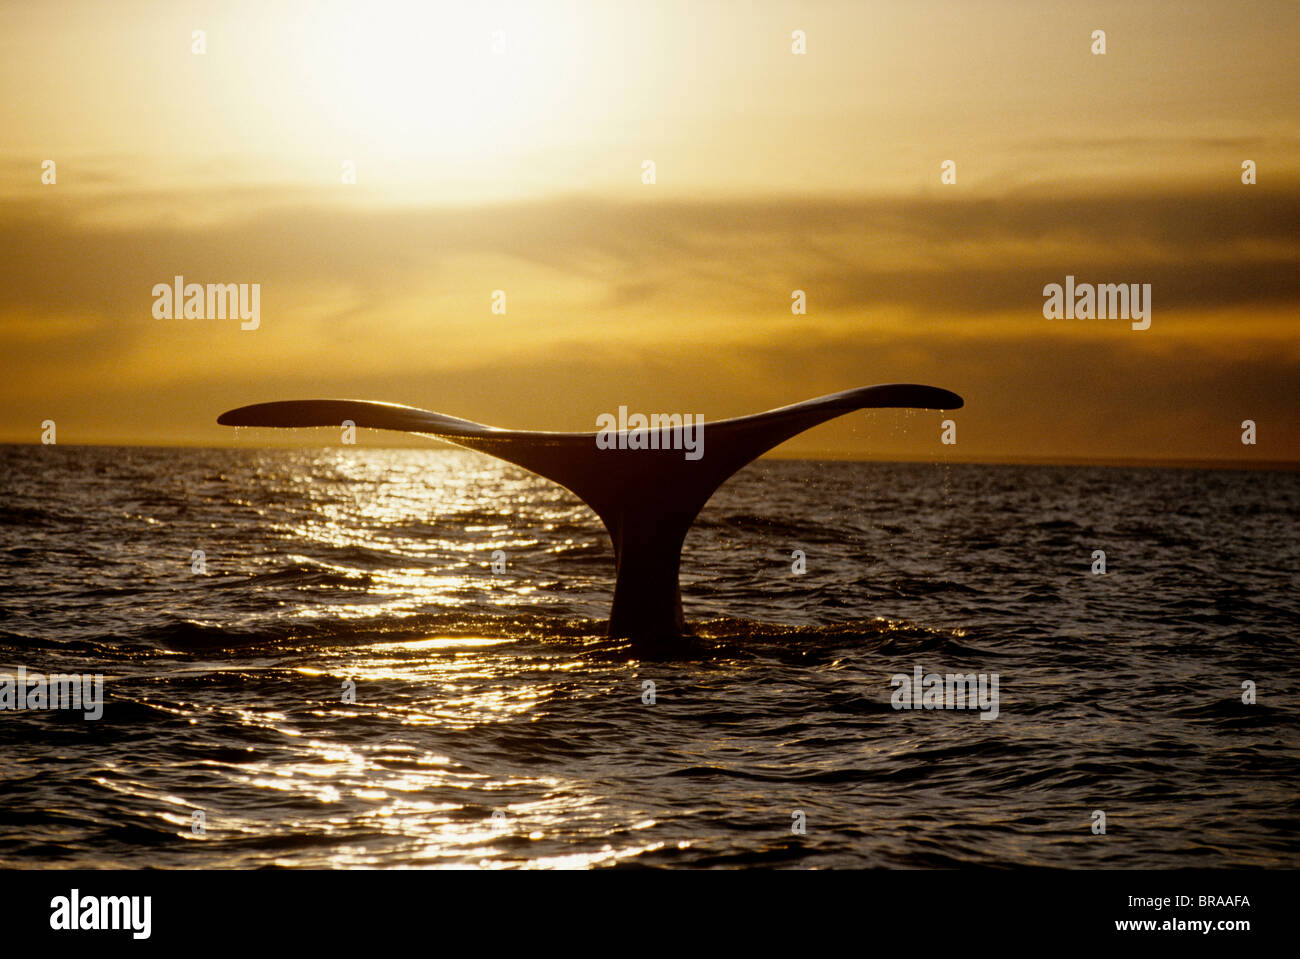 Southern right whale tale fluke at sunset {Balaena glacialis australis} Patagonia, South America Stock Photo